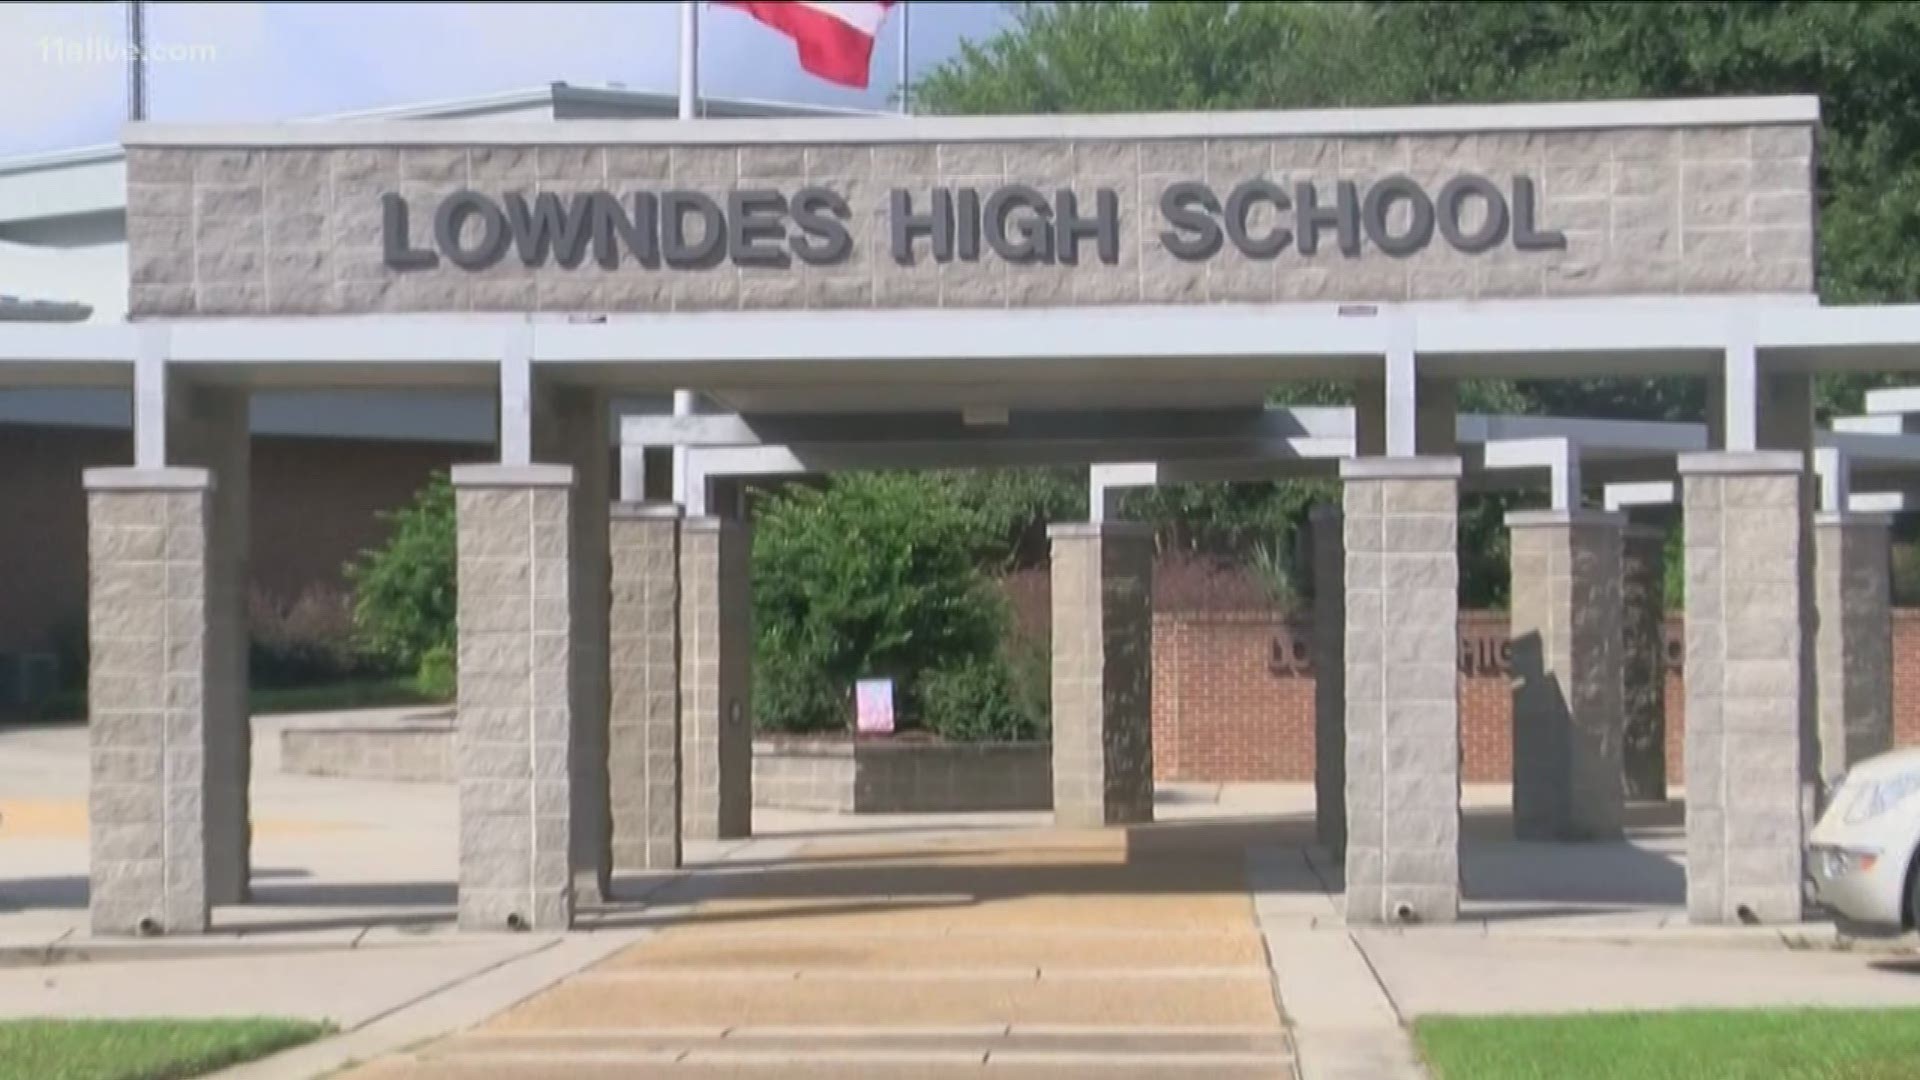 The Lowndes County Board of Education introduced the policy, which allows student prayer, but is for student private speech in general